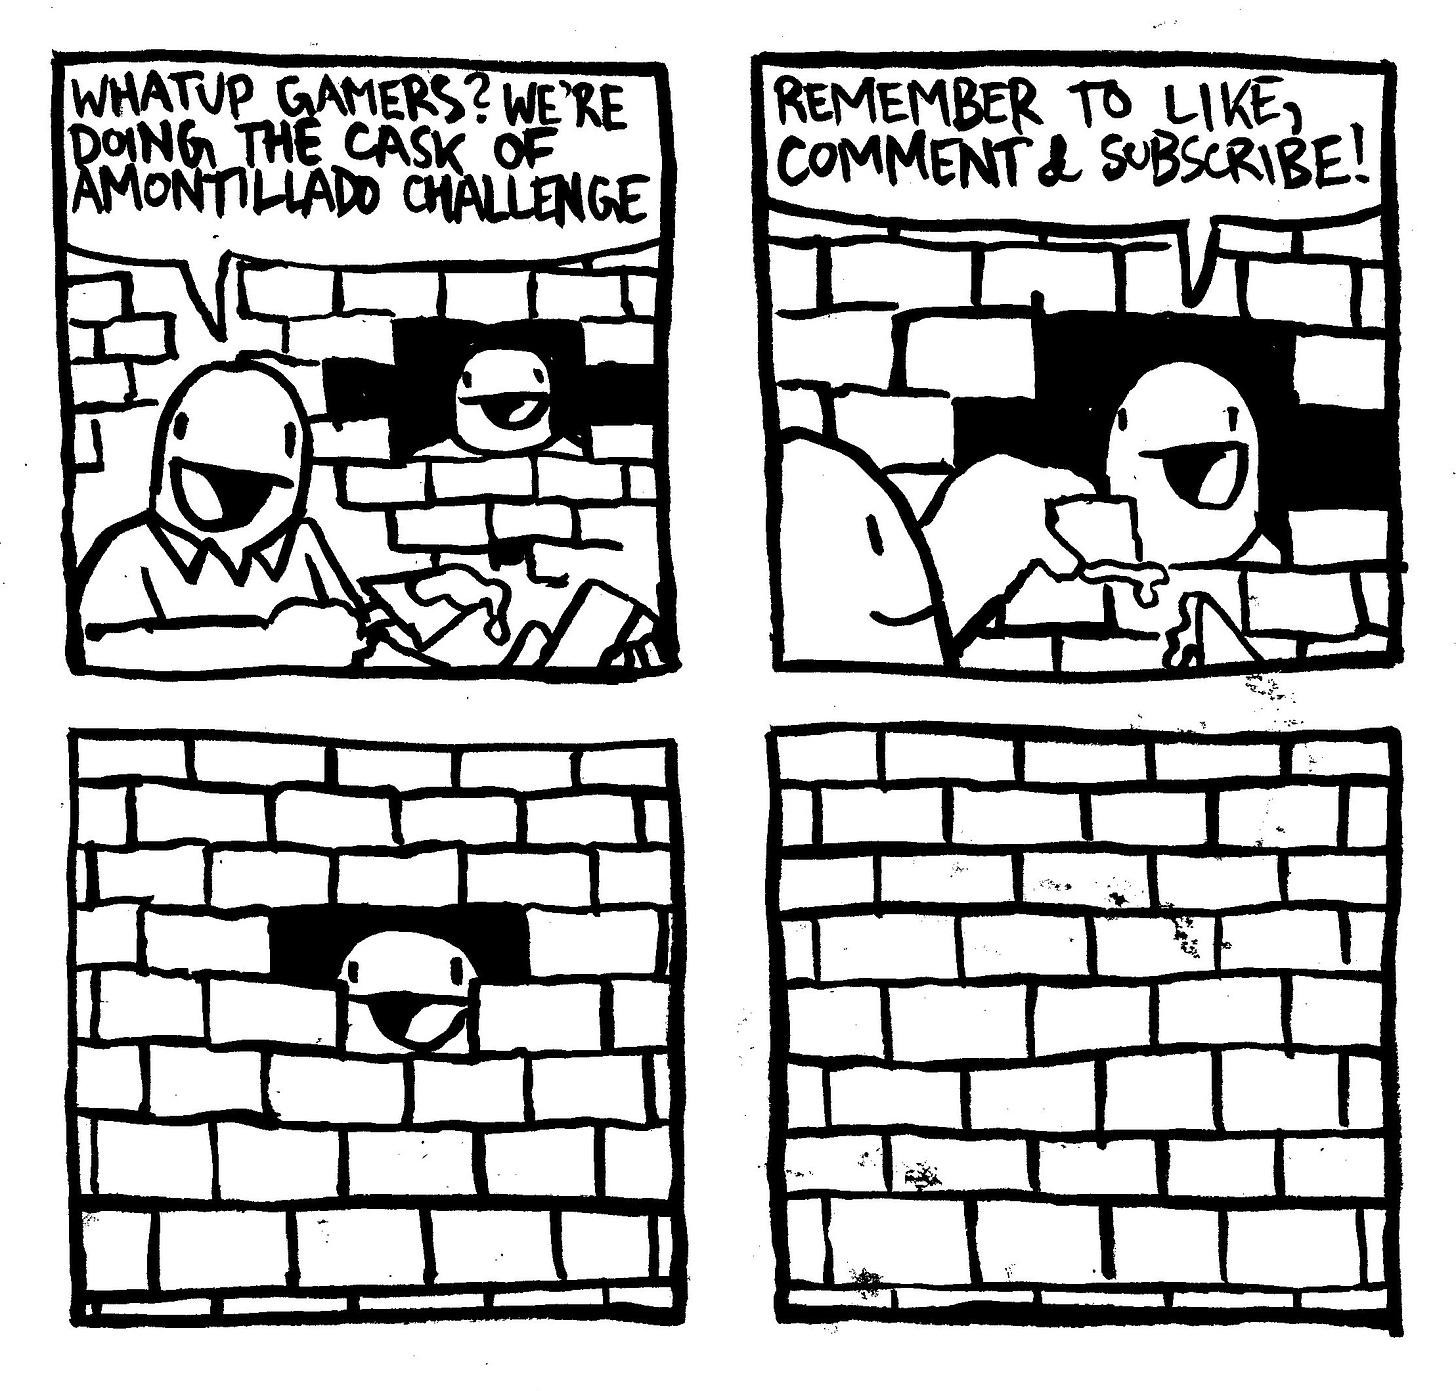 A vacantly smiling man is applying to mortar to a brick. Another man, also vacantly smiling, stares out from behind an unfinished hole in a brick wall. The man applying the mortar says "whatup gamers? we're doing the cask of amontillado challenge." The man behind the wall says "remember to like, comment & subscribe." The mortar man lays down a brick. The hole in the wall gets smaller, the man behind it still smiling with a blank expression in his eyes. The wall is complete. The man's face is now obscured.